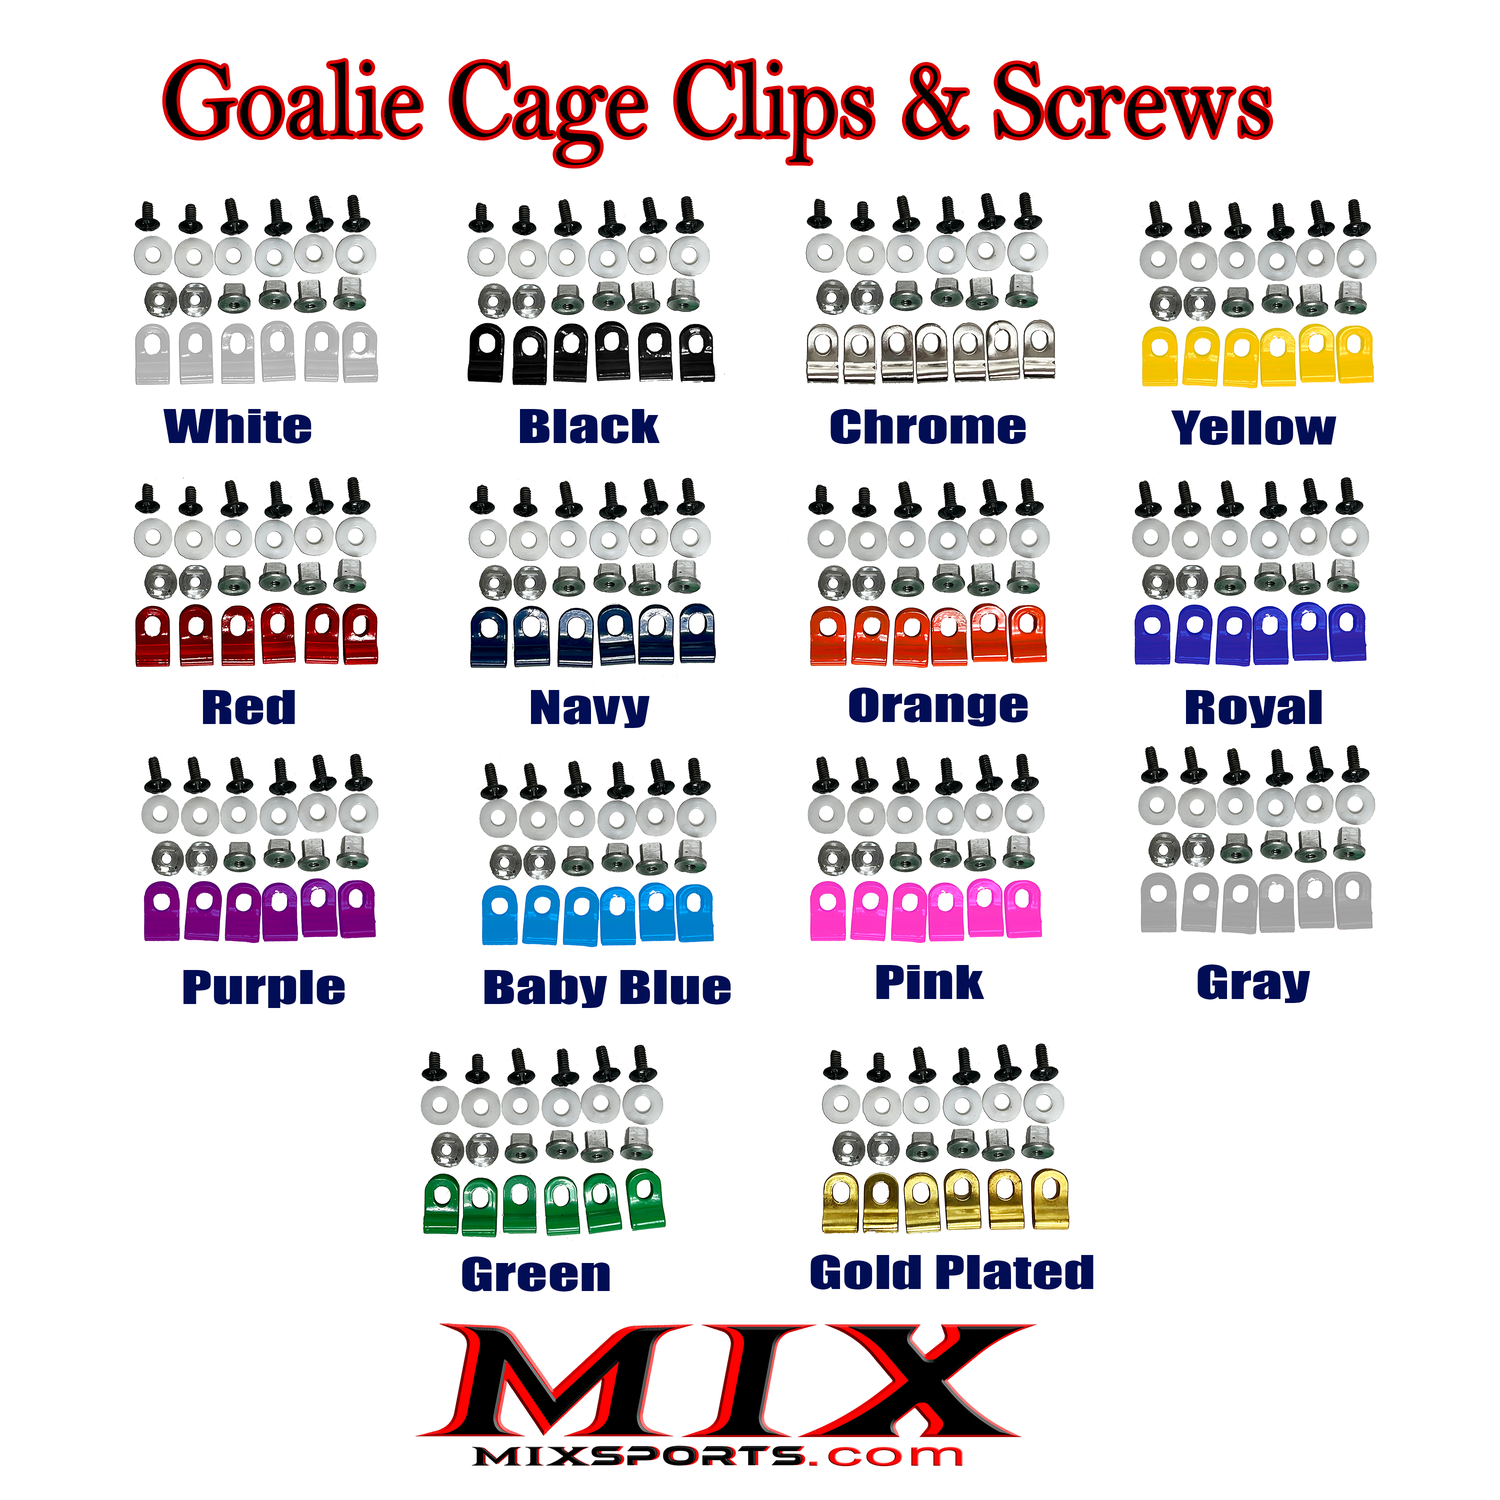 Mix Hockey Goalie Mask Cage Powder Coated Clips and Screws kits - 14 colors available